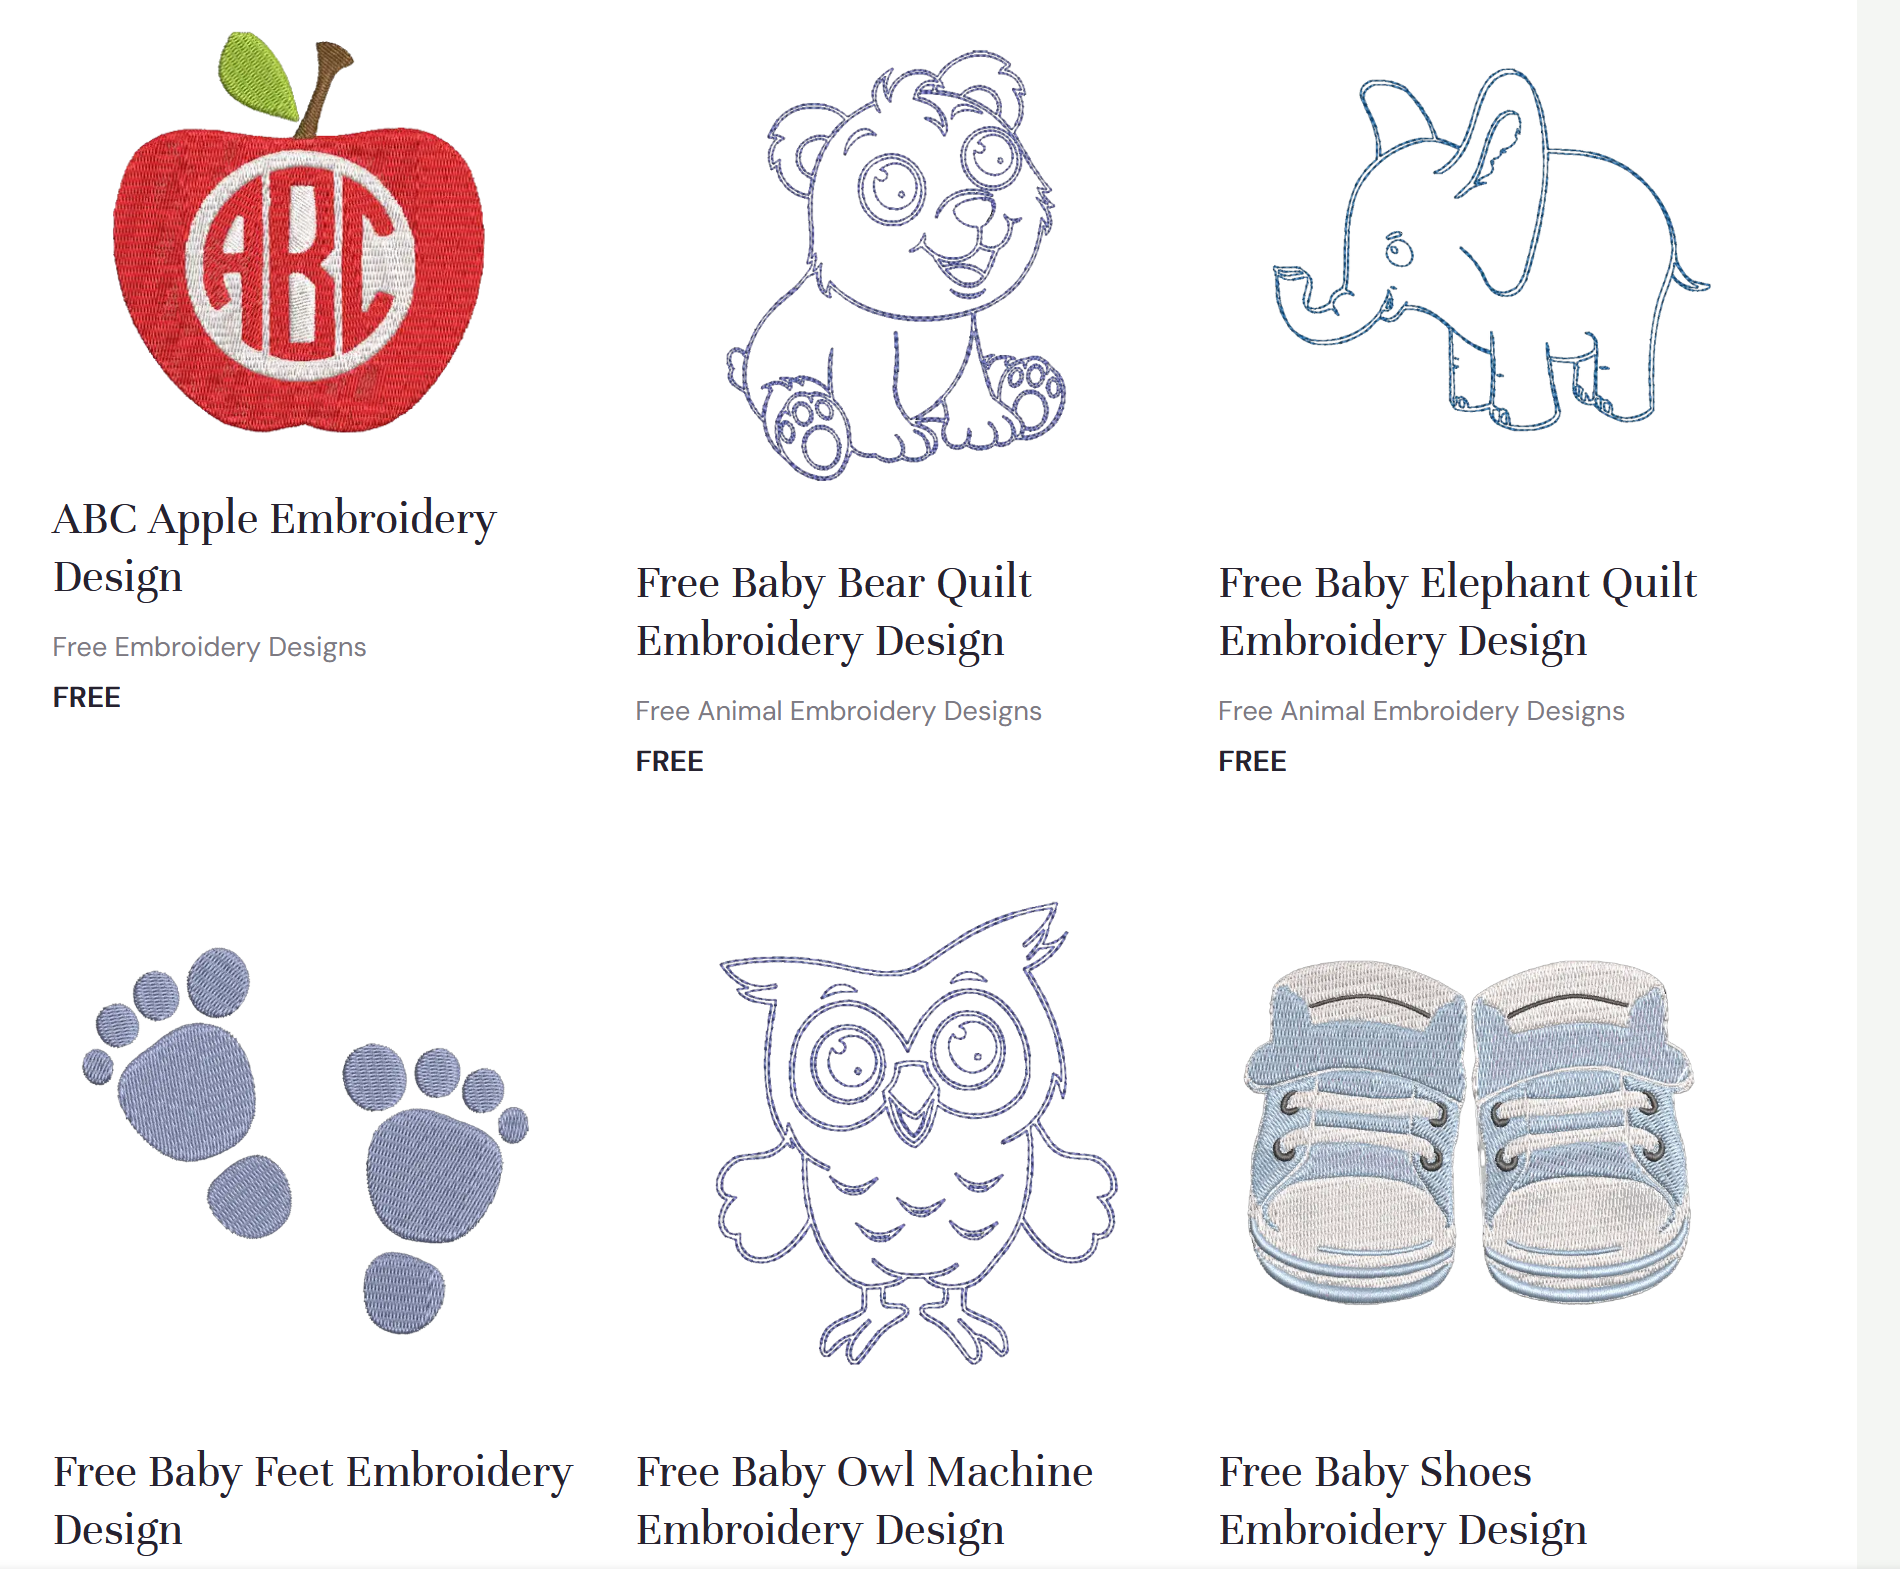 Free Baby Embroidery Designs for quilts